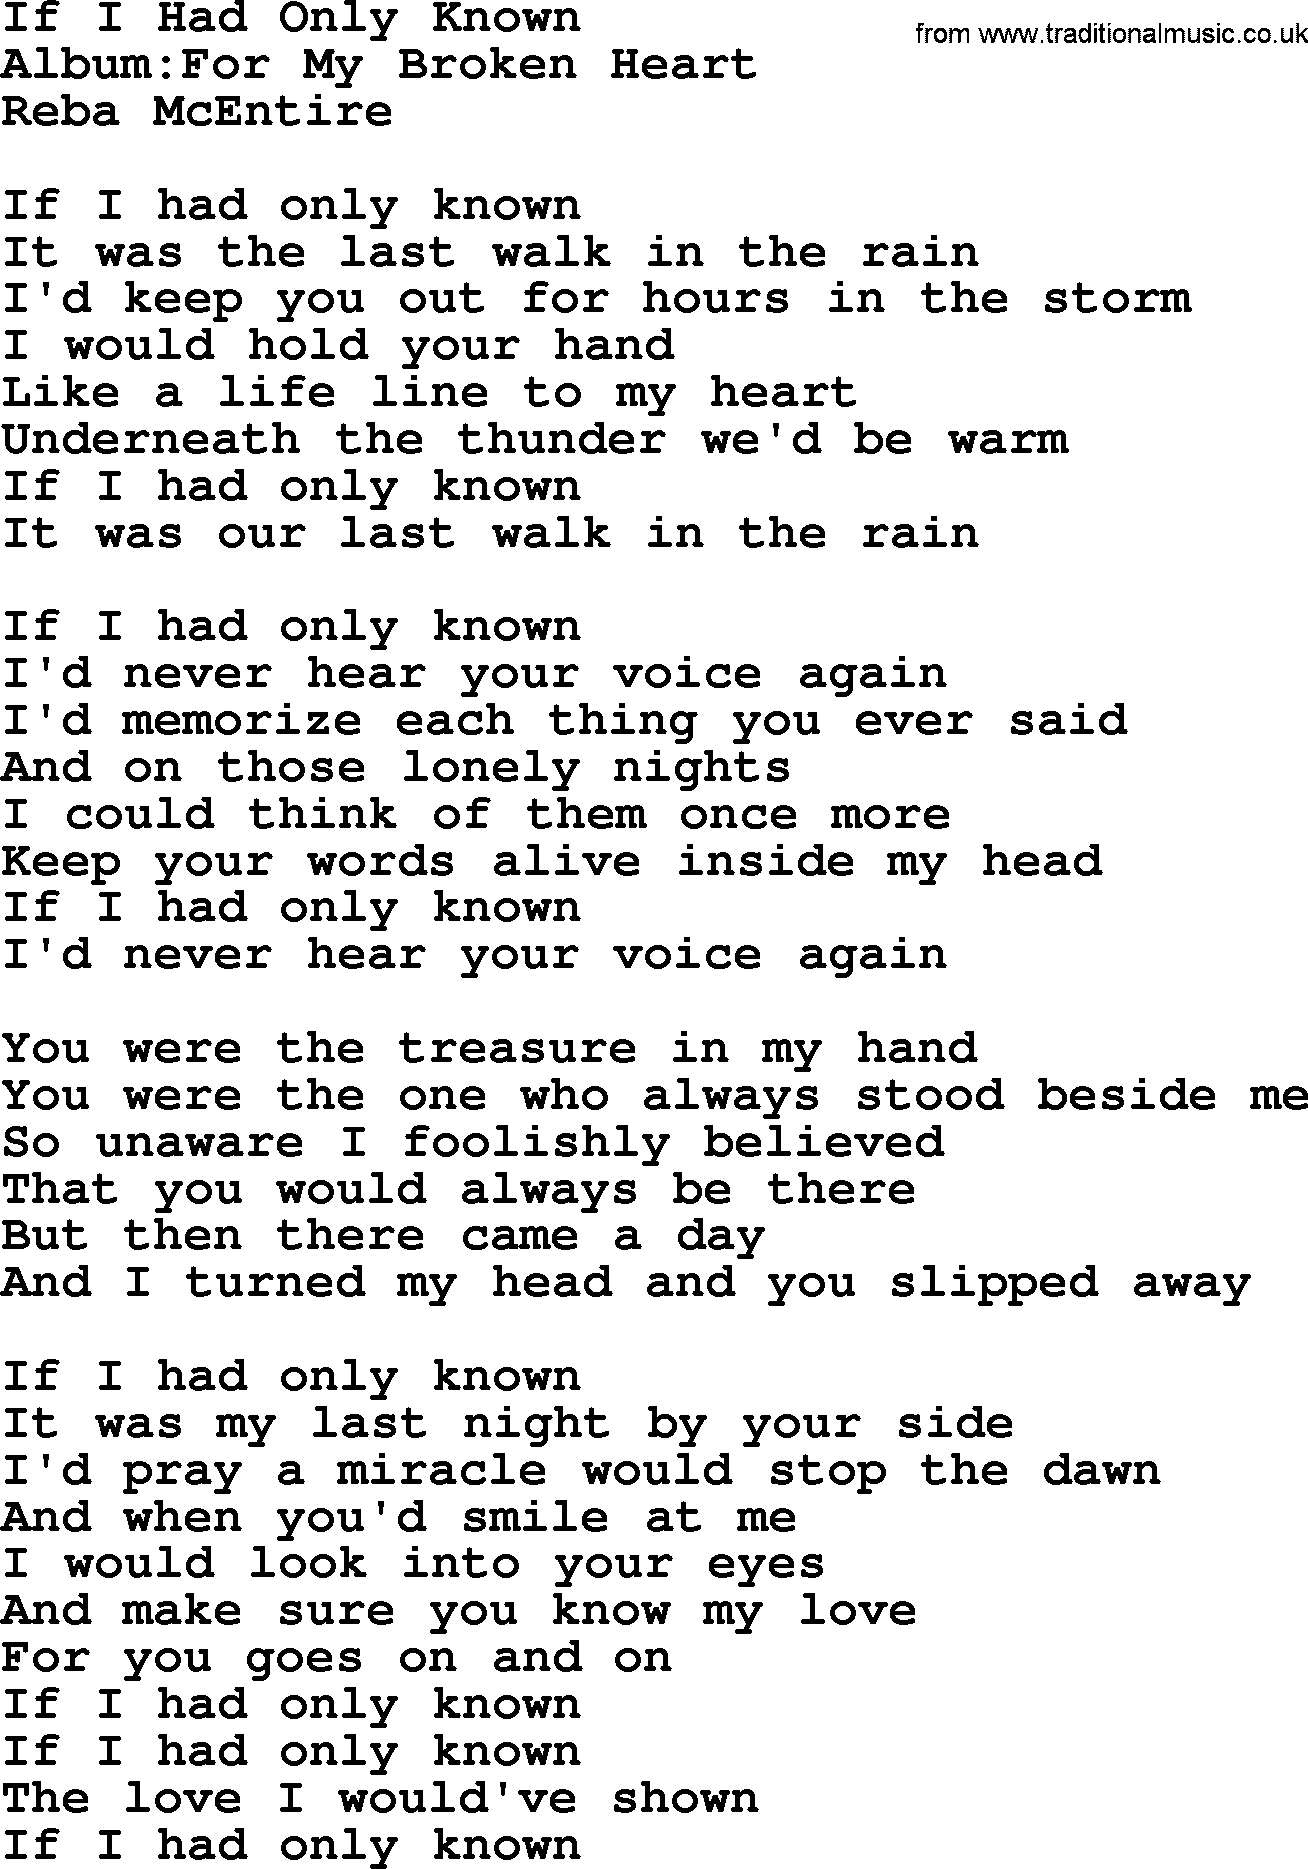 Reba McEntire song: If I Had Only Known lyrics